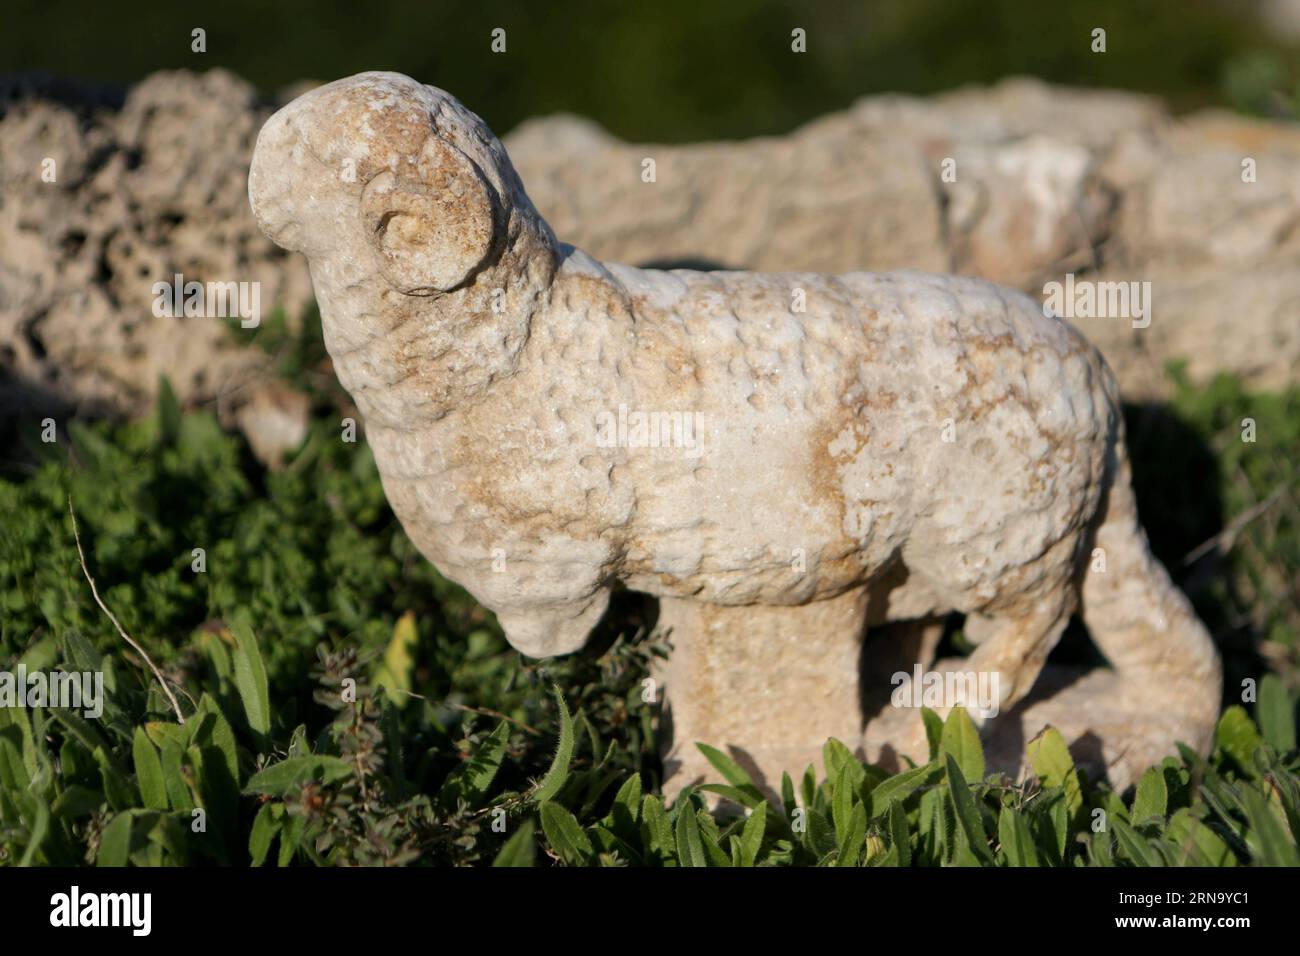 (151224) -- JERUSALEM, Dec. 24, 2015 -- Photo taken on Dec. 24, 2015 shows a Byzantine-era marble sculpture of a lamb unearthed in Israel. Archaeologists on Thusday unearthed a Byzantine-era marble sculpture of a lamb near the Ancient Caesarea Church in the Caesarea National Park, in northern Israel. Experts believe that the lamb served as part of the decoration in the 6th-7th century CE church that was discovered adjacent to the ancient port. ) MIDEAST-ISRAEL-ARCHAEOLOGY-BYZANTINE-ERA-MARBLE SCULPTURE Jinipix/NimrodxGlikman PUBLICATIONxNOTxINxCHN   151224 Jerusalem DEC 24 2015 Photo Taken ON Stock Photo